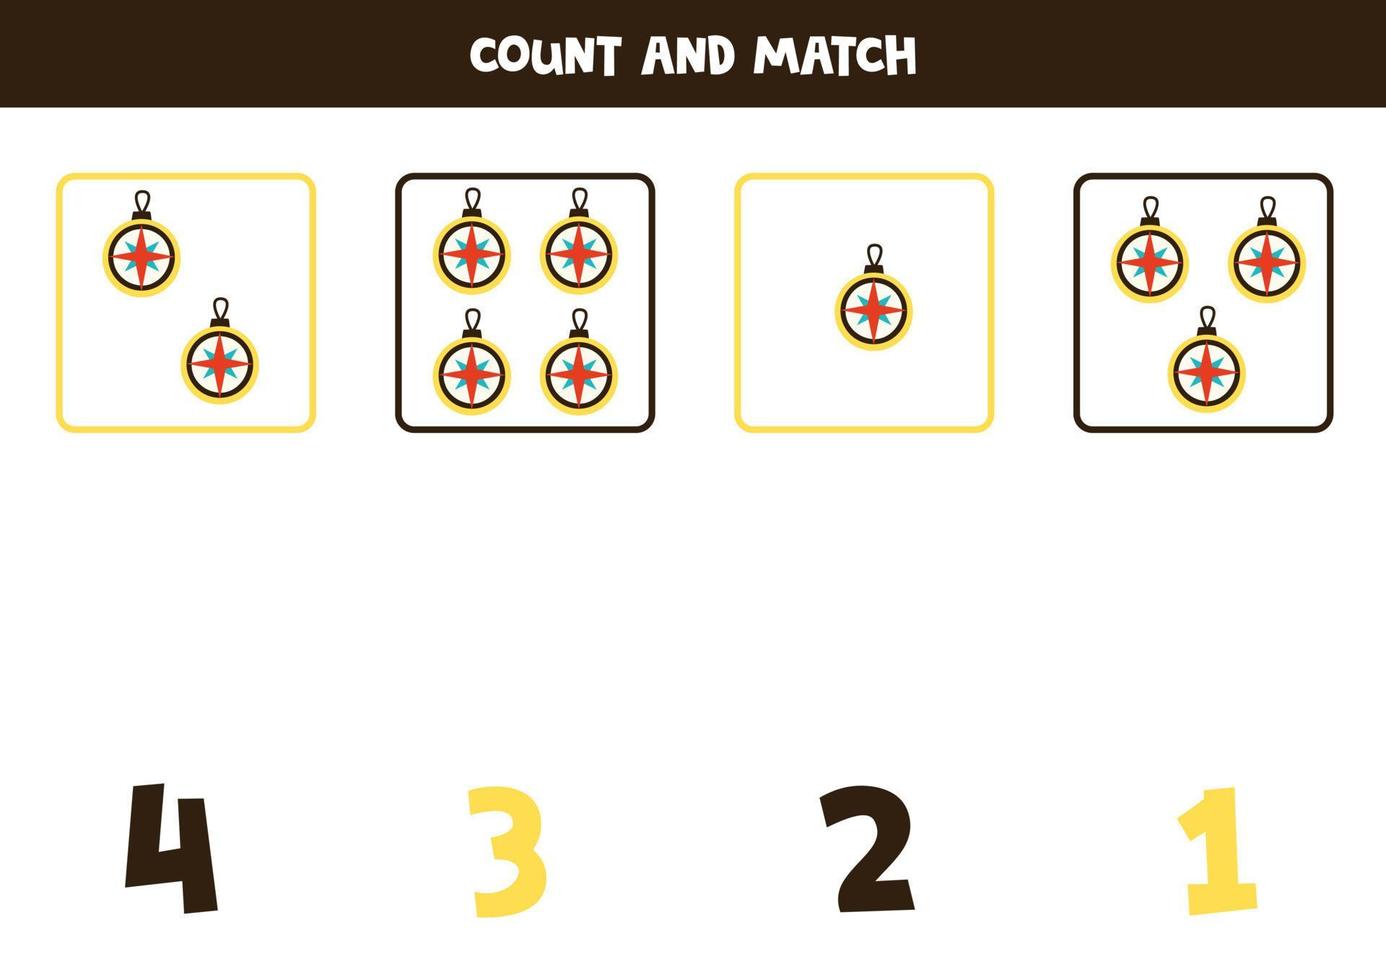 Counting game for kids. Count all compasses and match with numbers. Worksheet for children. vector